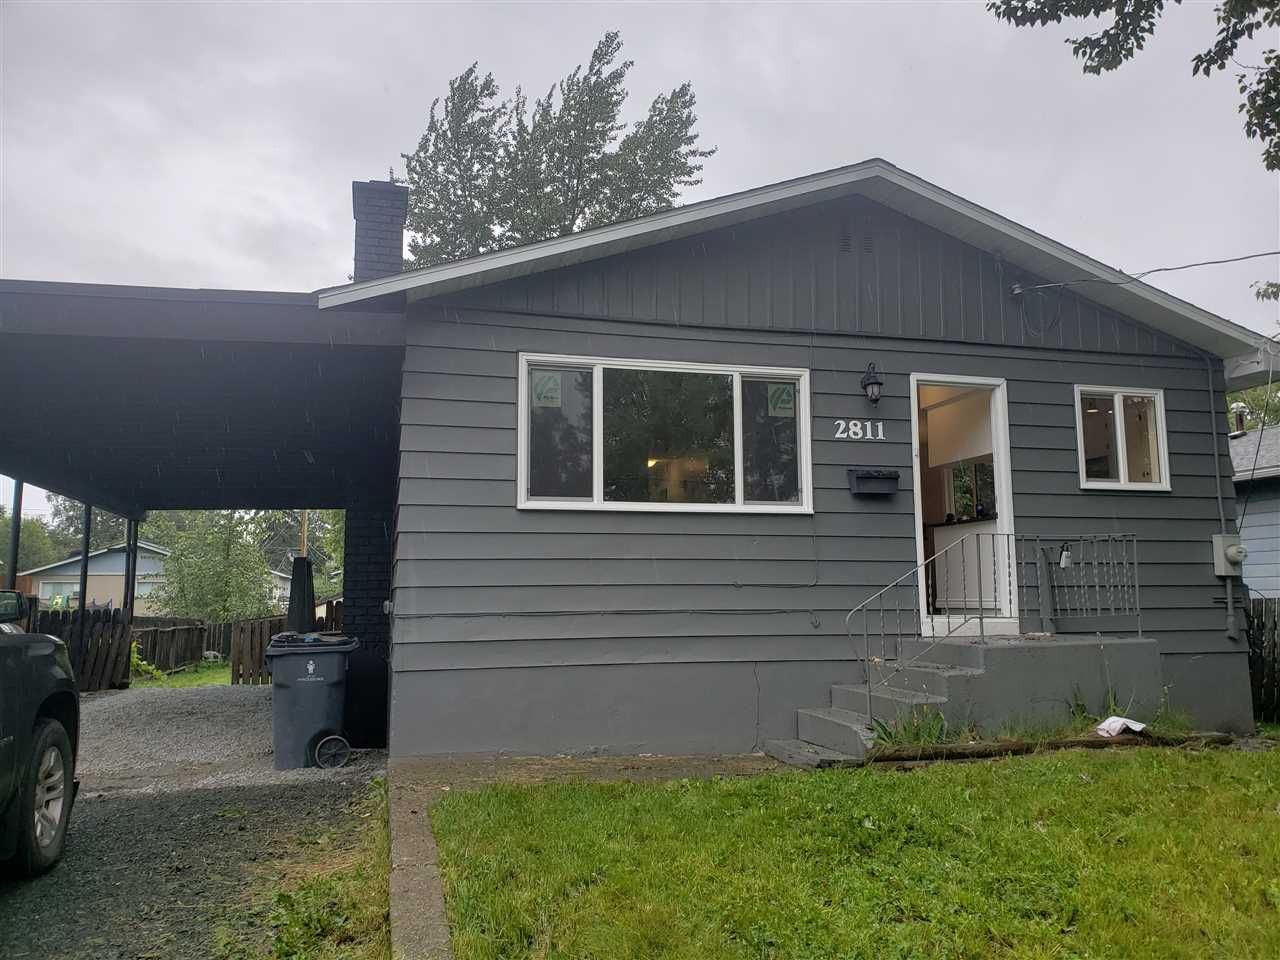 Main Photo: 2811 NORWOOD Street in Prince George: VLA House for sale (PG City Central (Zone 72))  : MLS®# R2471981